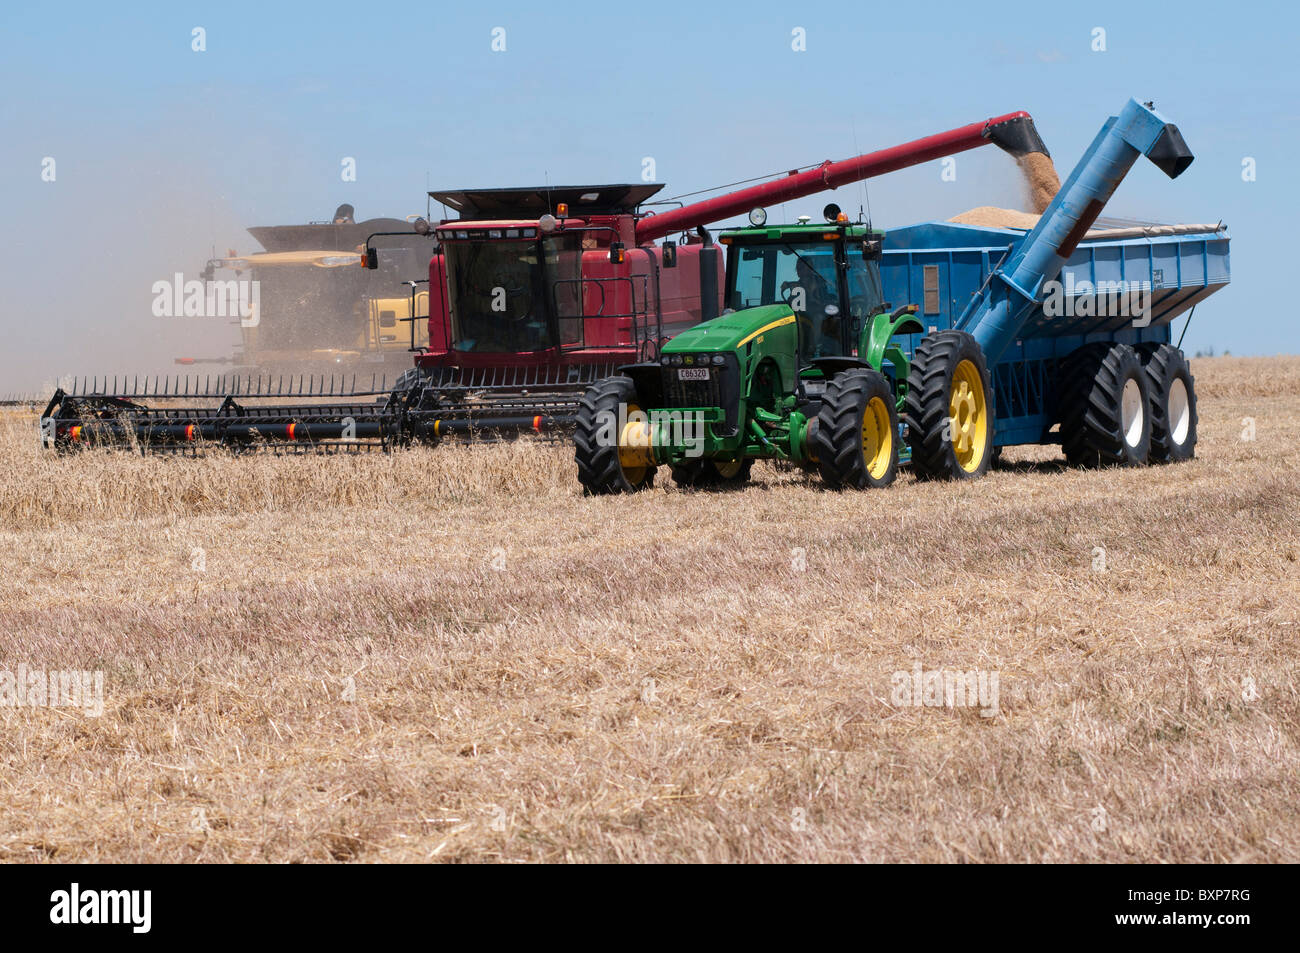 Wheat harvesting in far western New South Wales, Australia Stock Photo